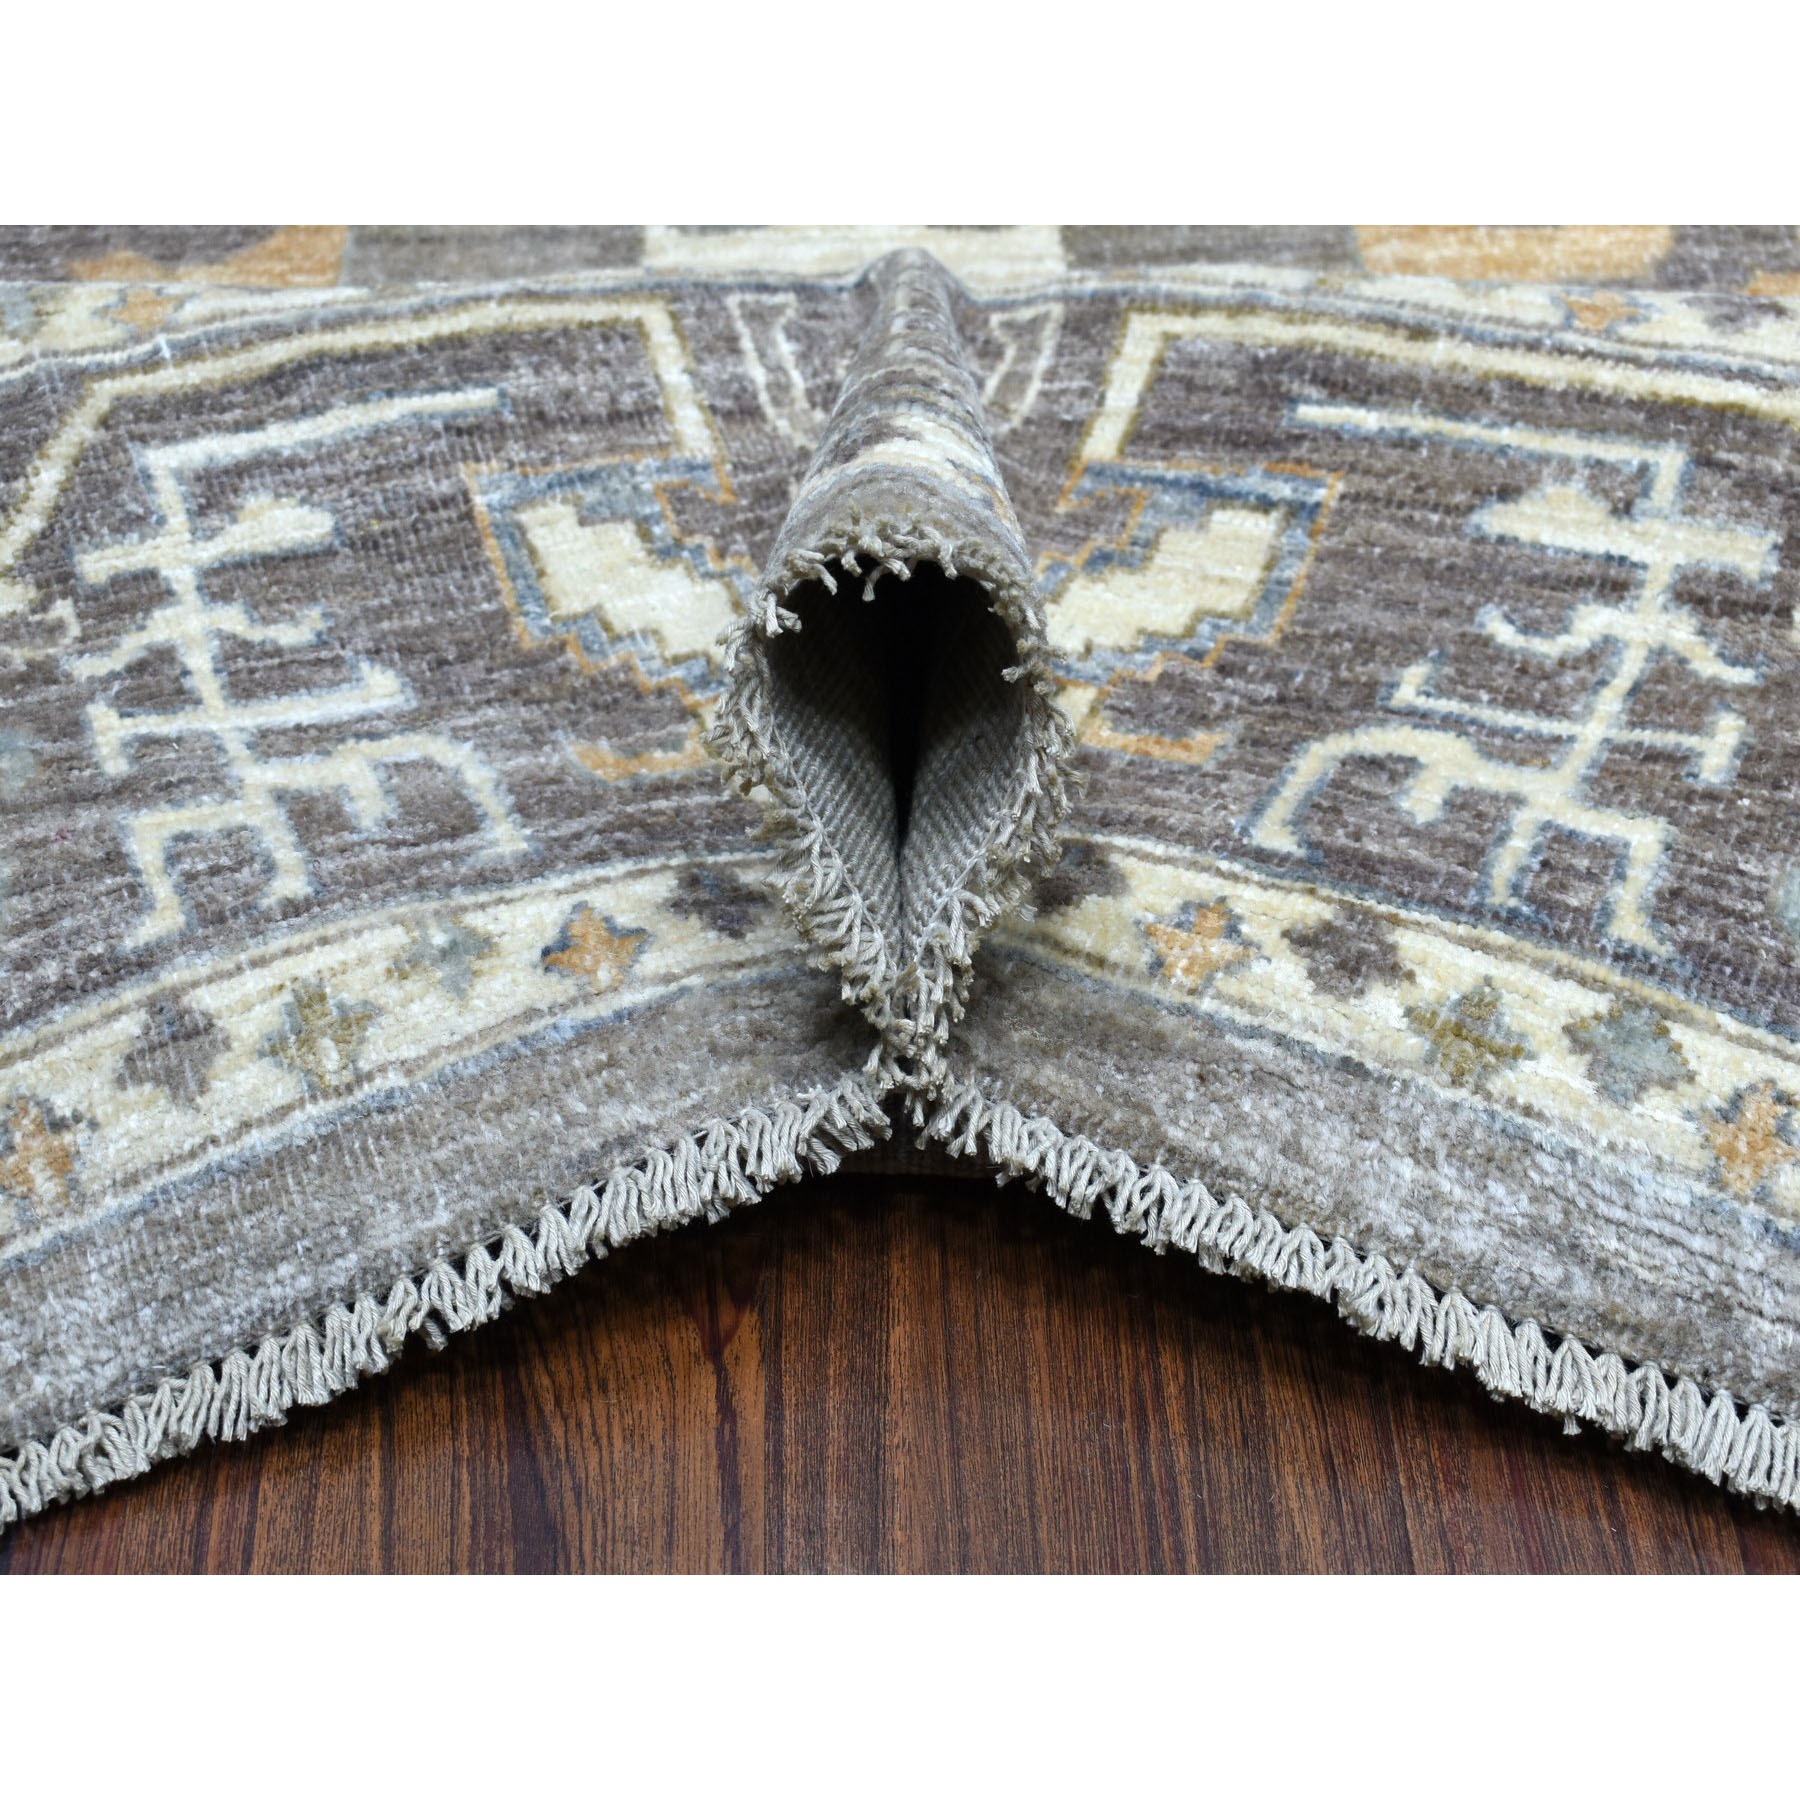 10-x13-7  Gray Peshawar Serrated Leaves Mahal Design Hand Knotted Oriental Rug 